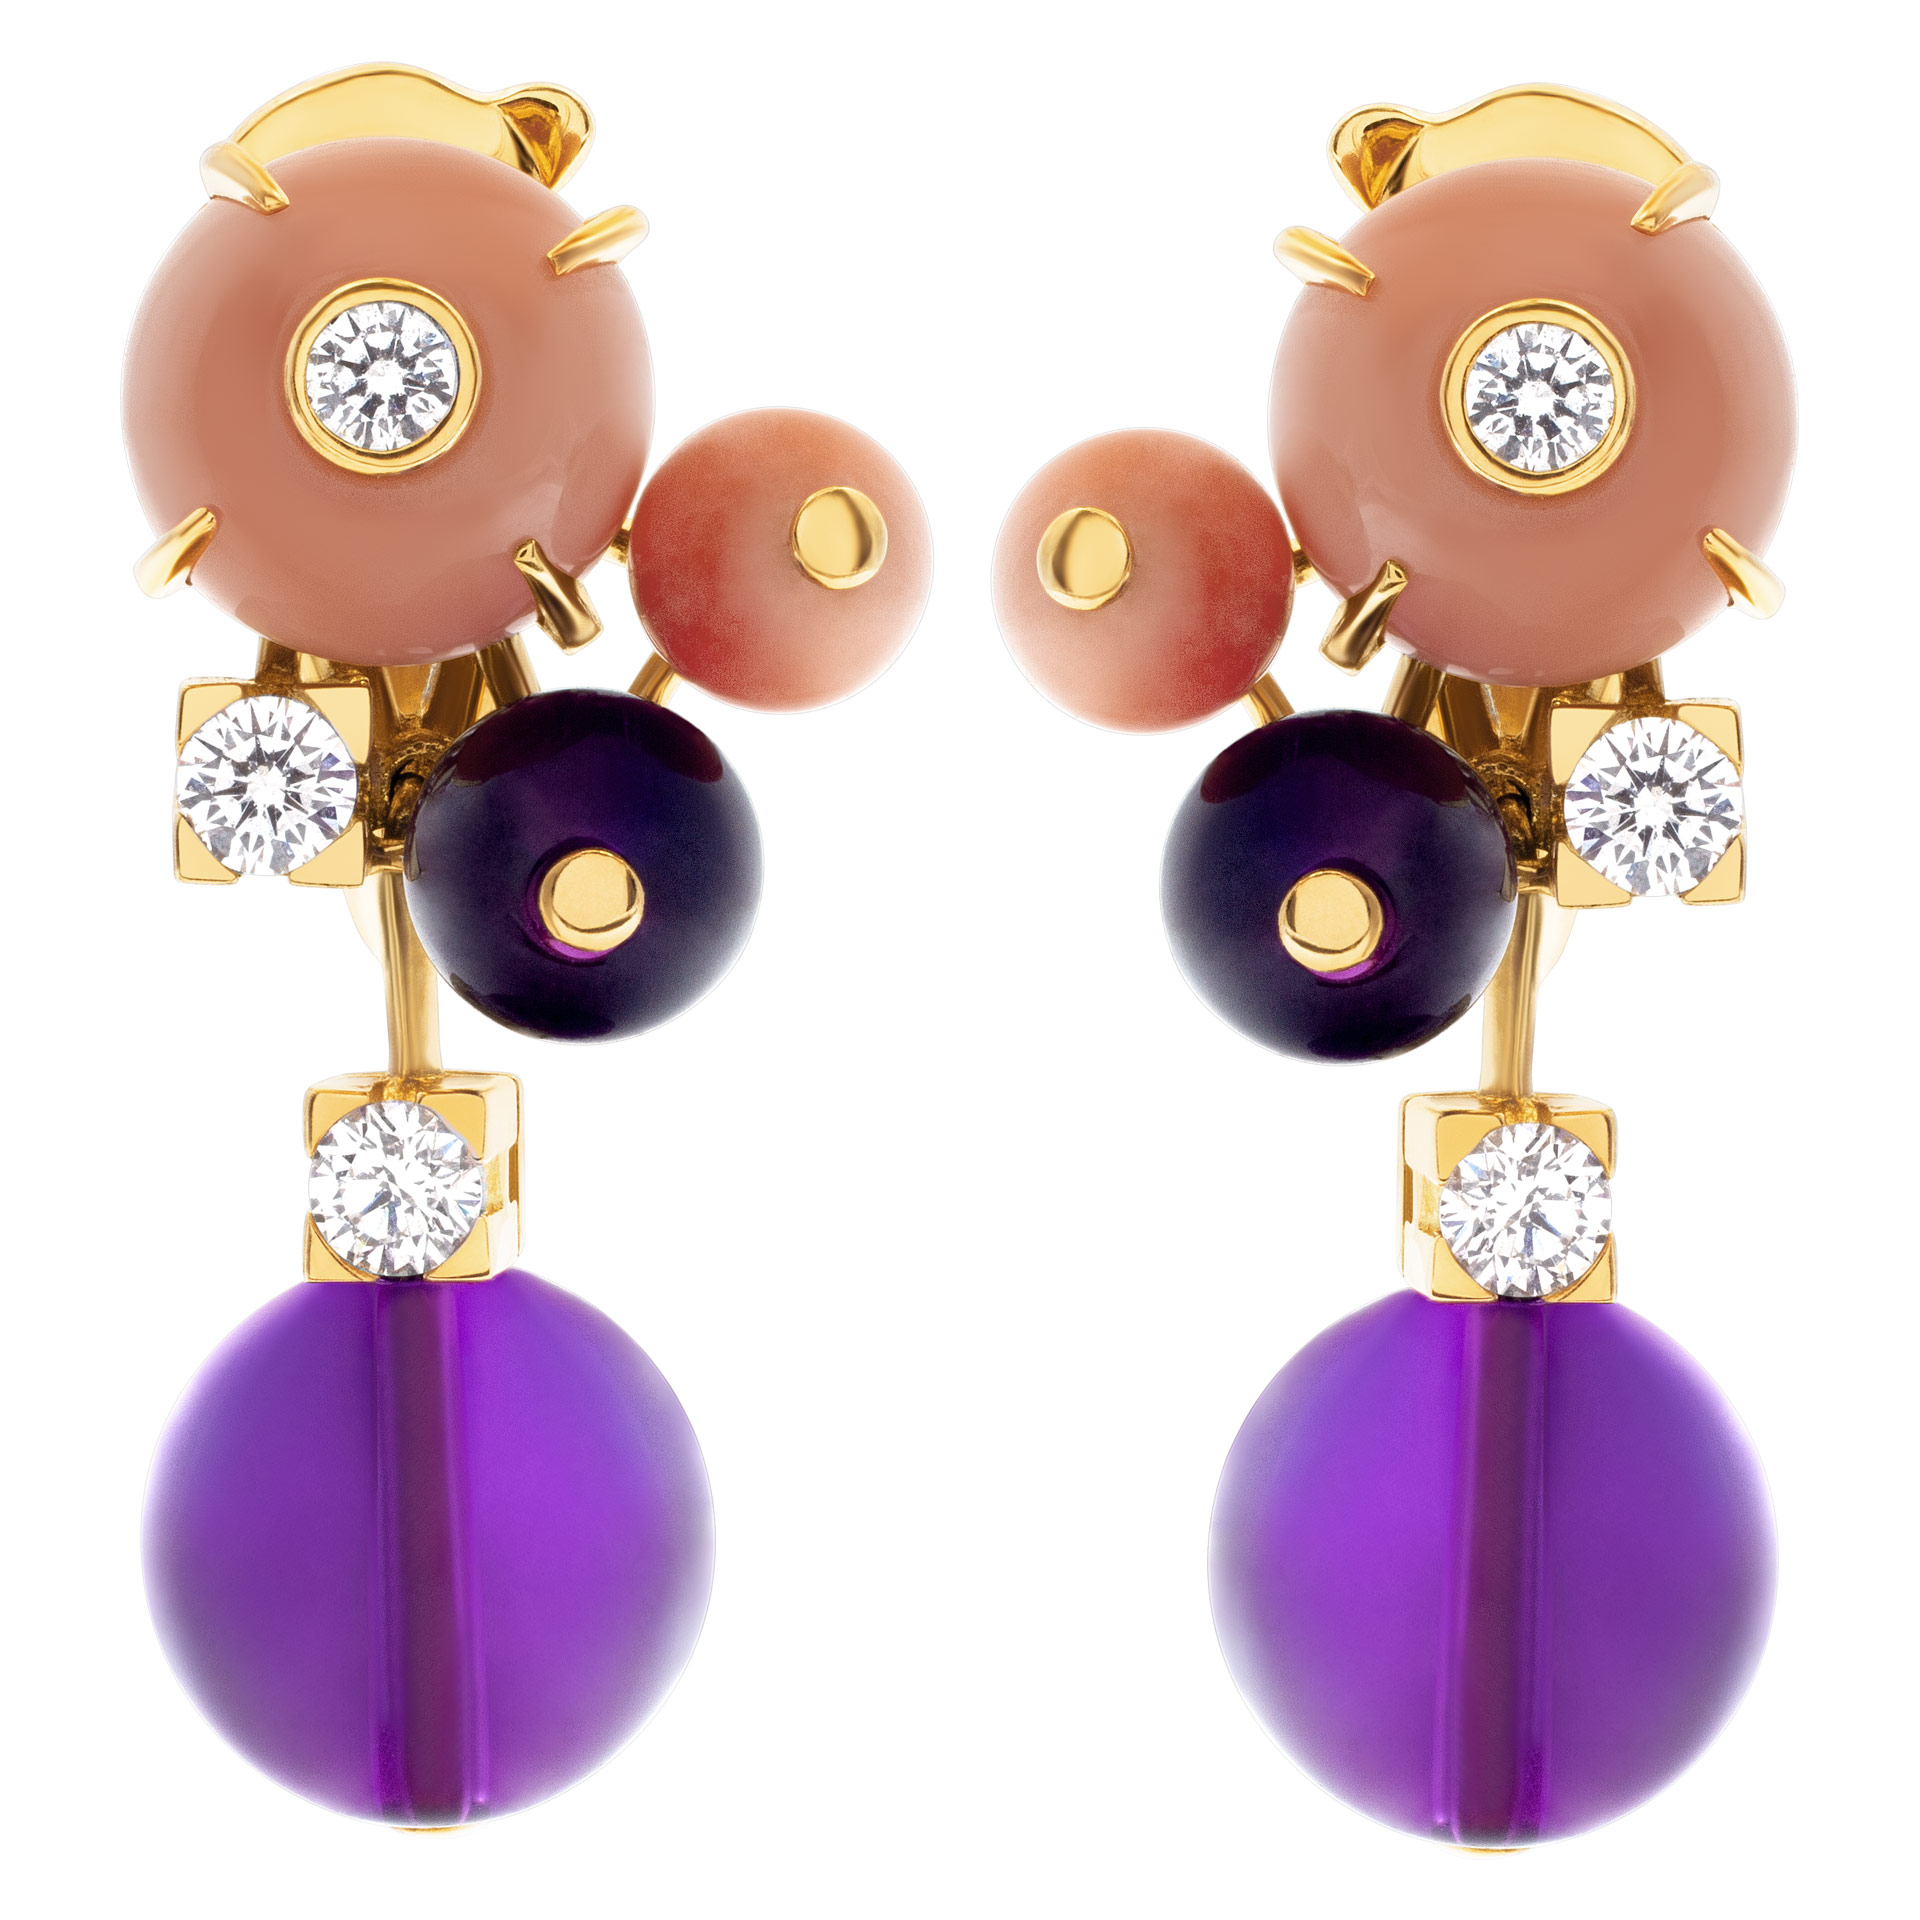 Cartier Delices de Goa earrings in 18k with diamonds, coral and amethyst